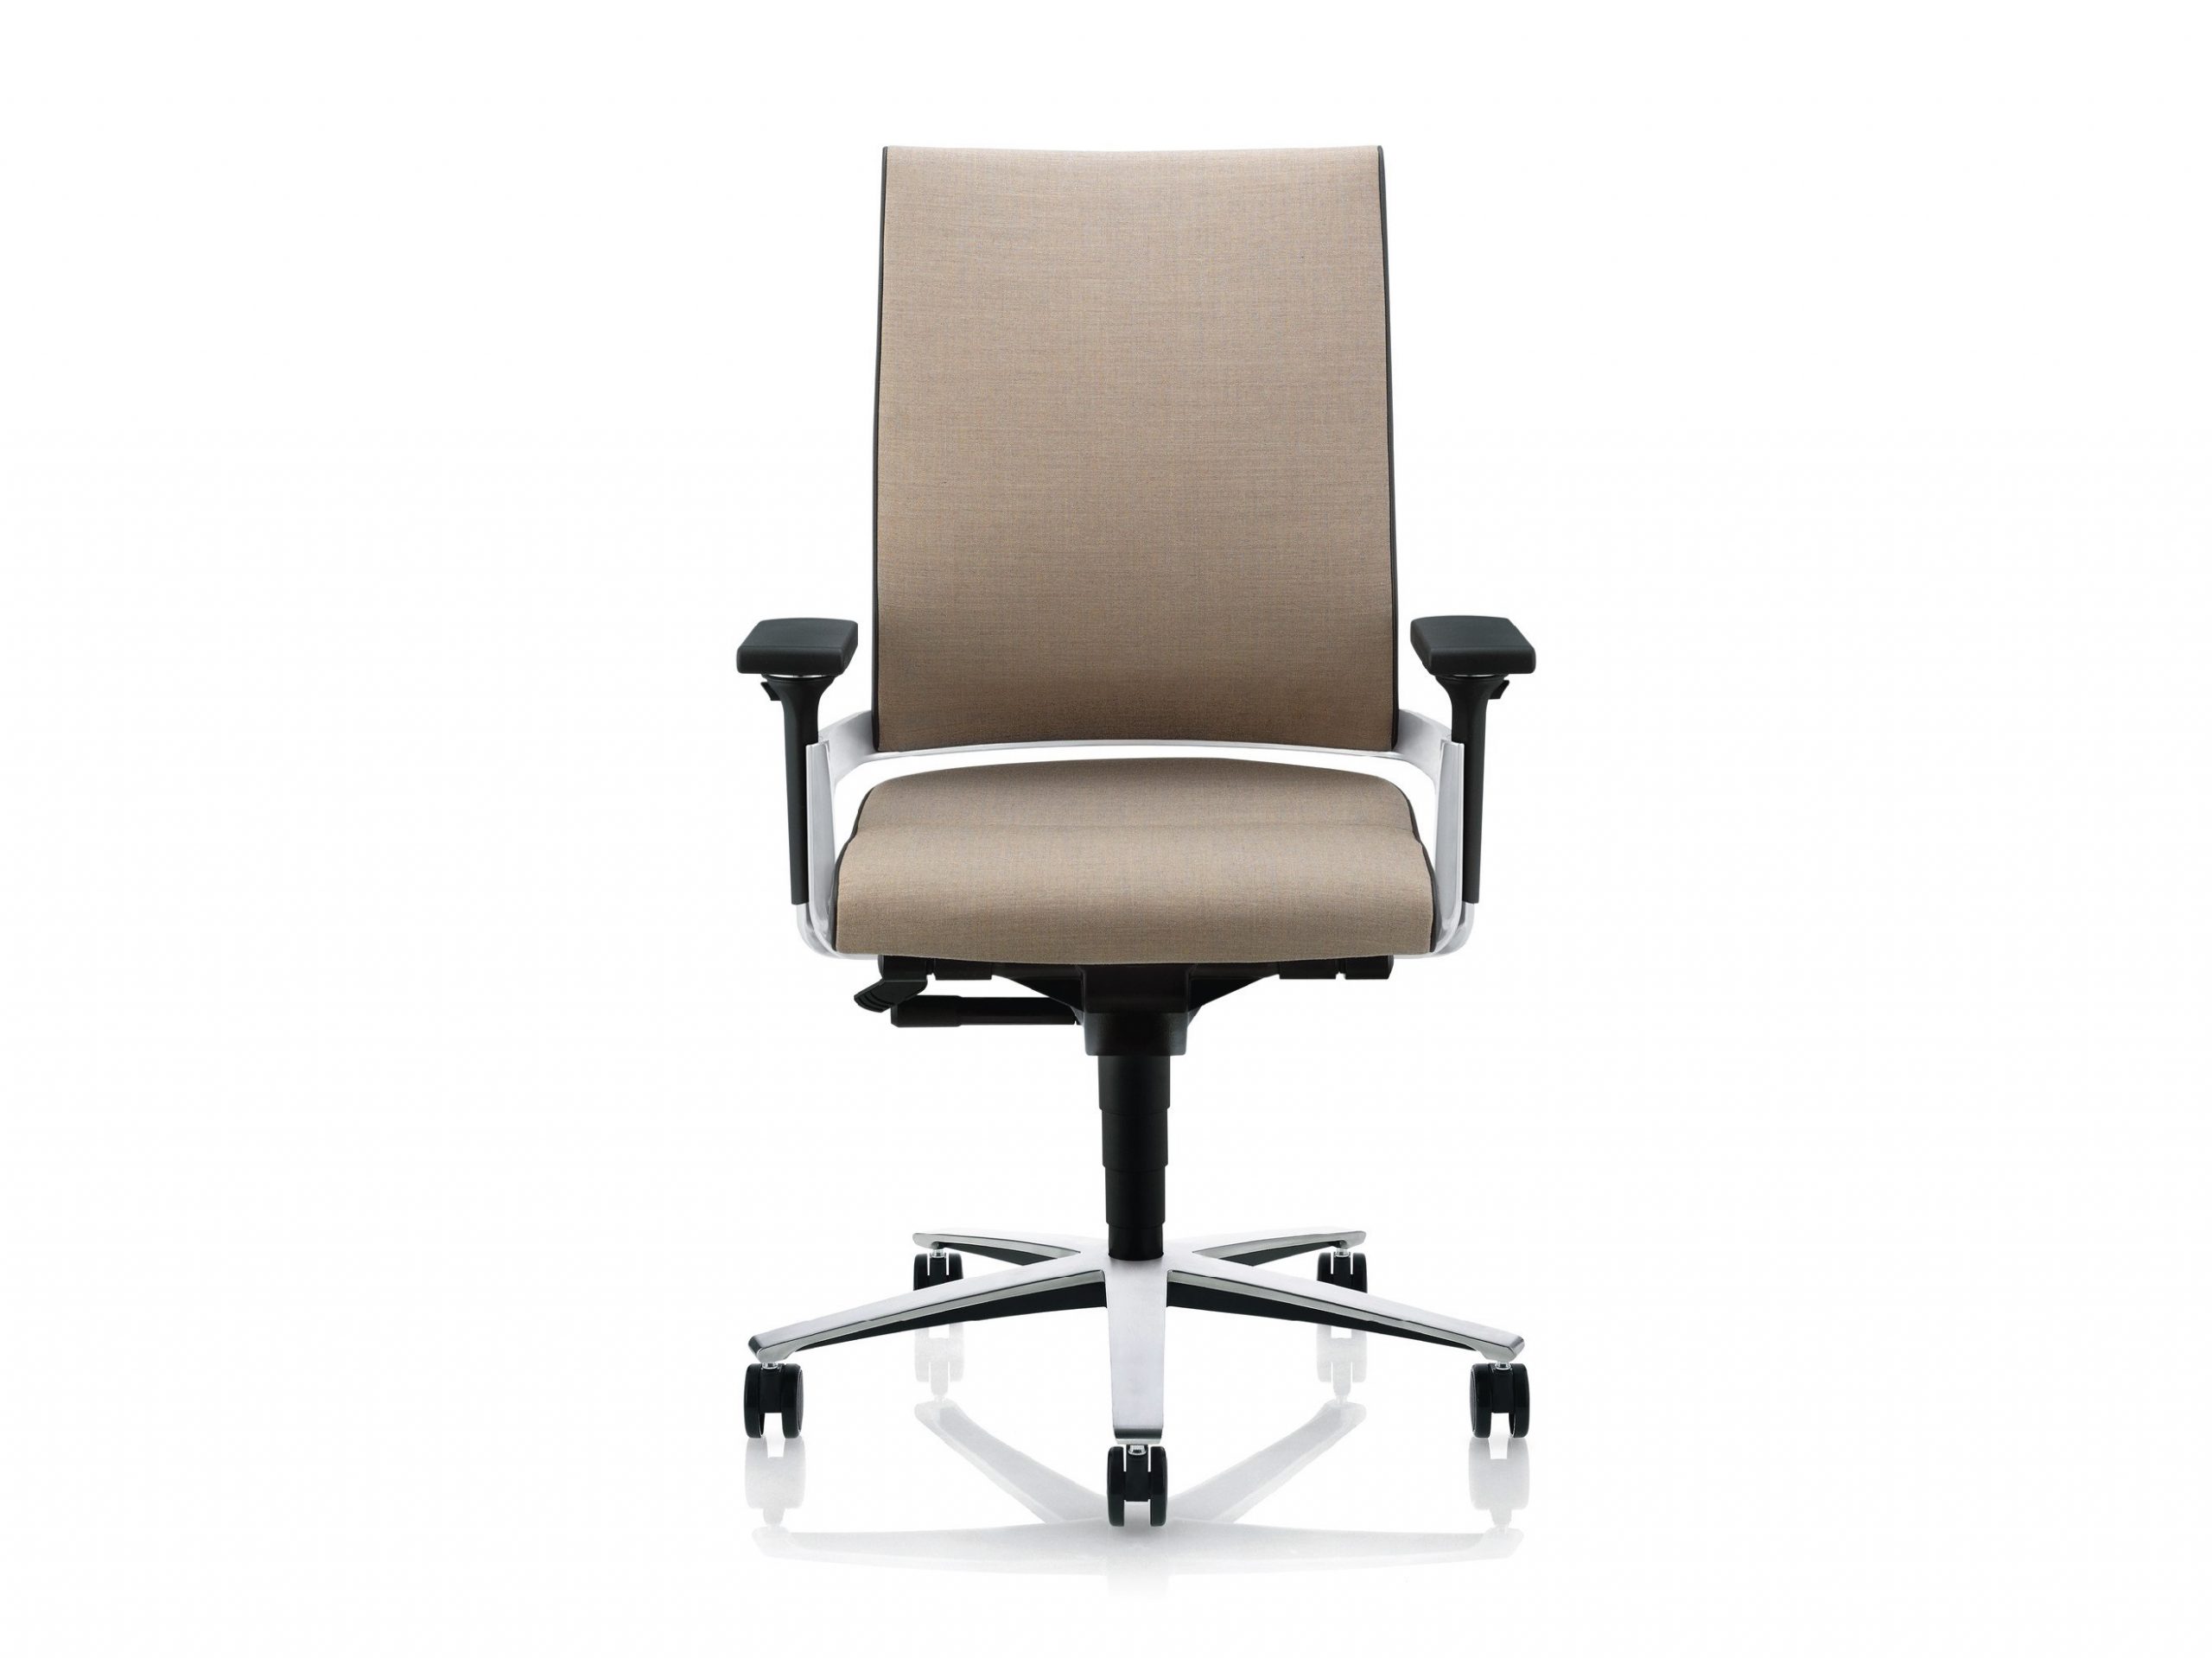 Which is the most expensive office chair in the world?